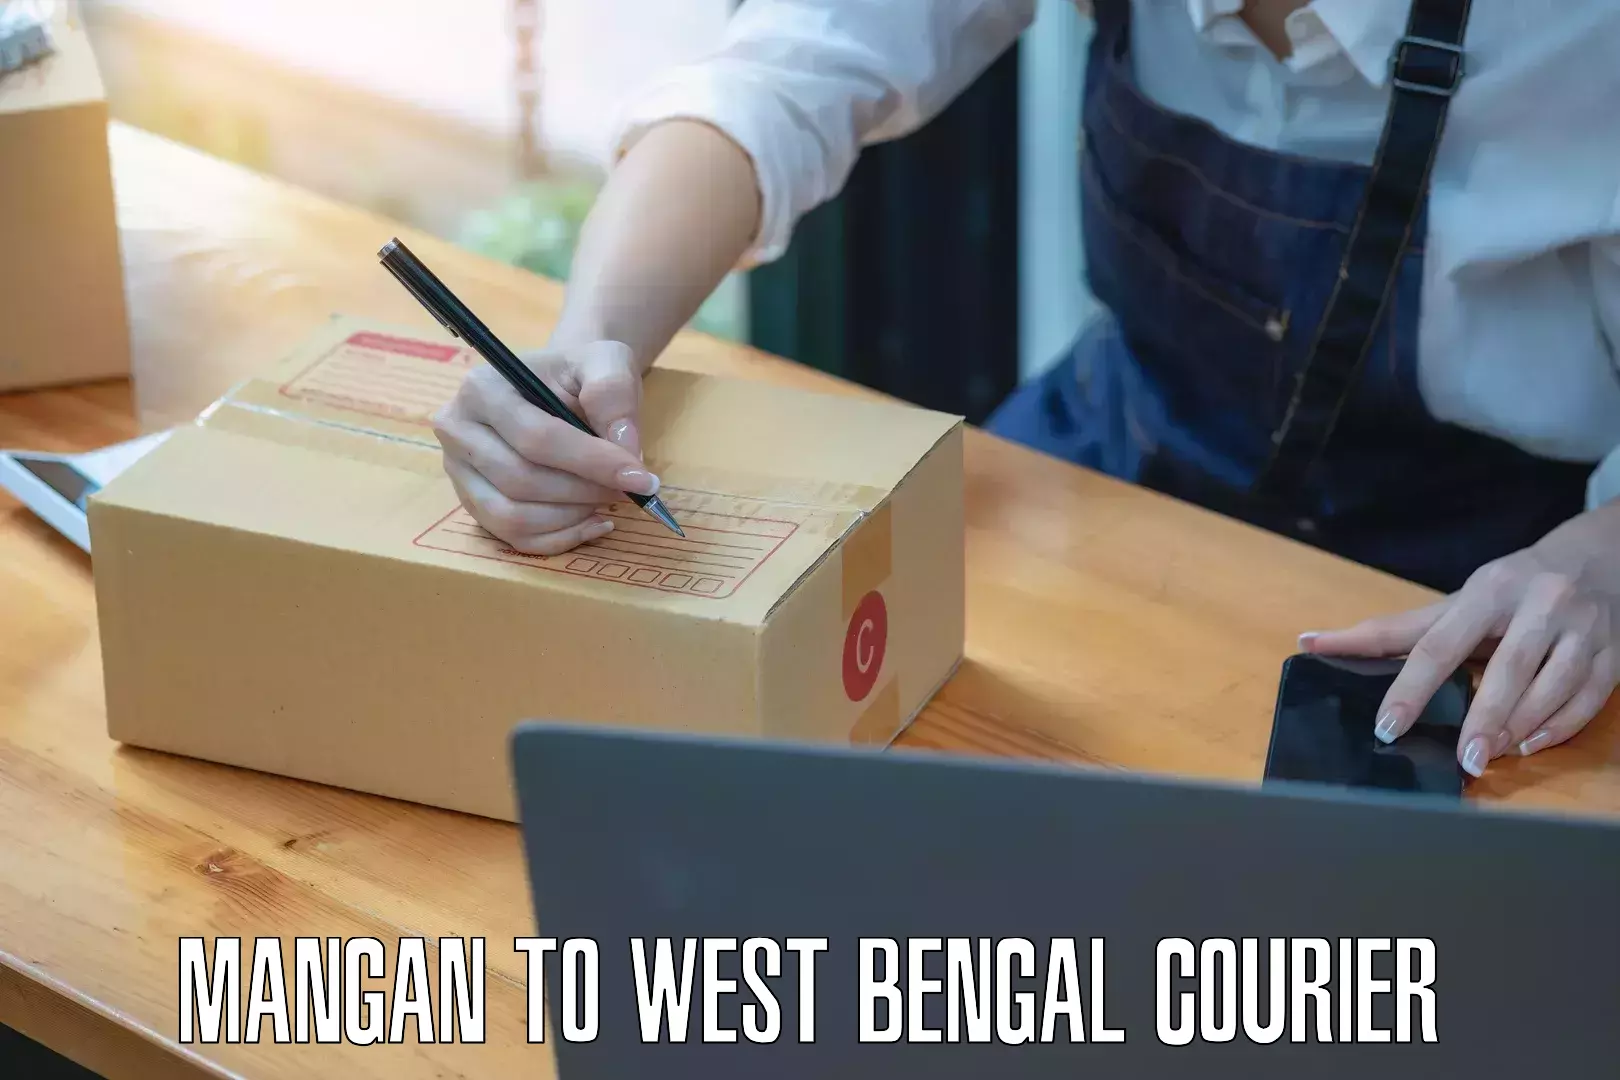 Fast delivery service Mangan to West Bengal